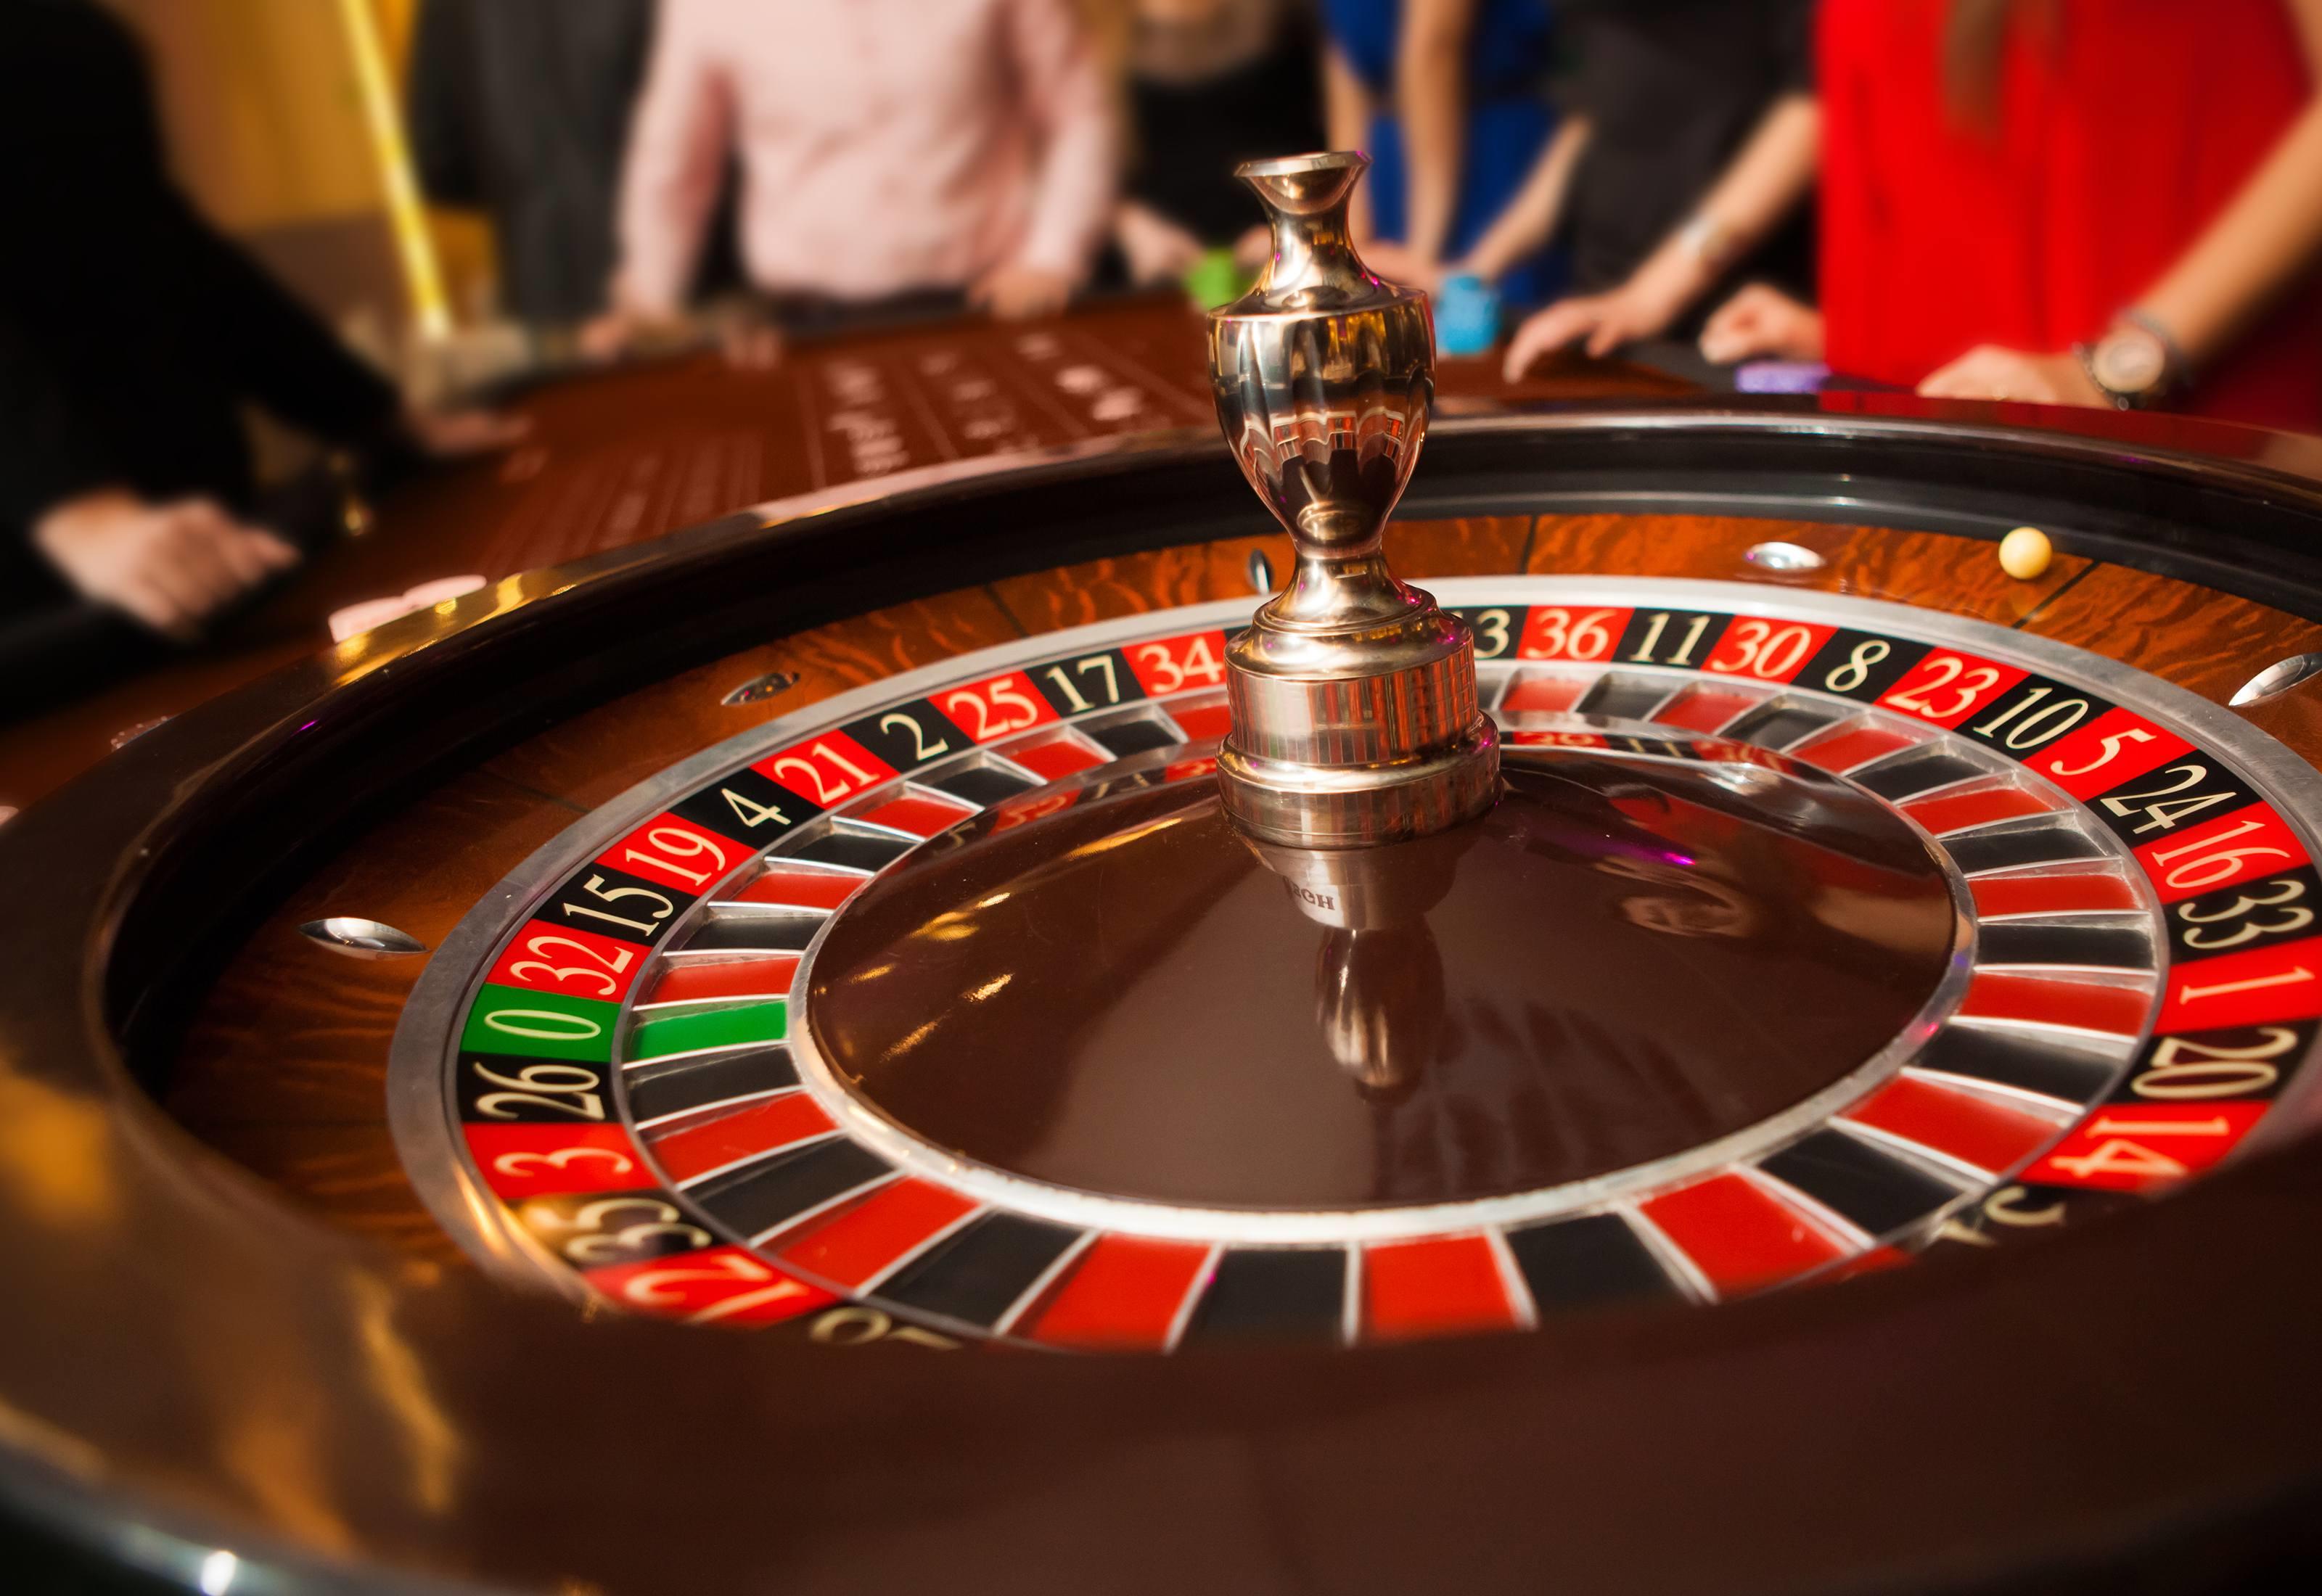 How to Bet on the Roulette Table